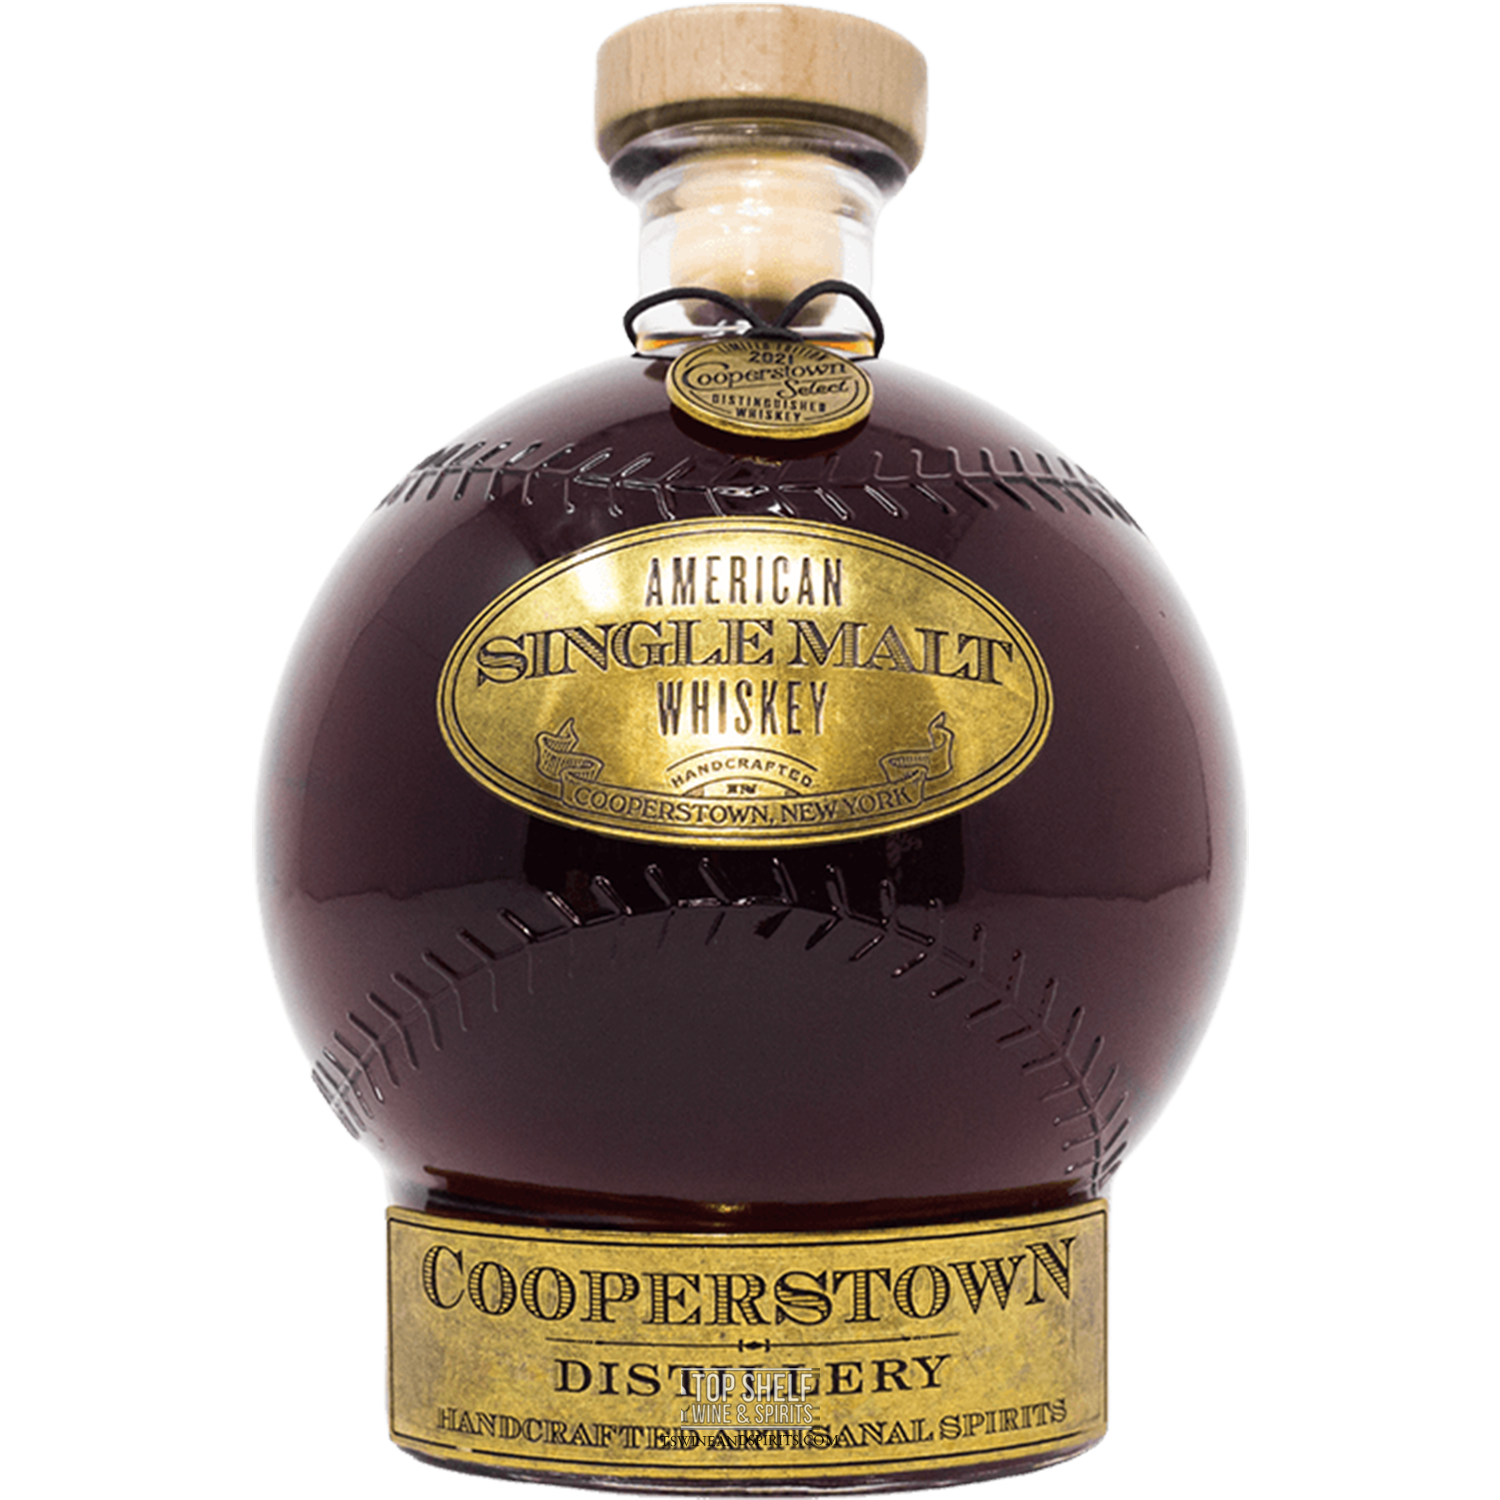 Cooperstown Select American Single Malt Whiskey (Limited Edition)